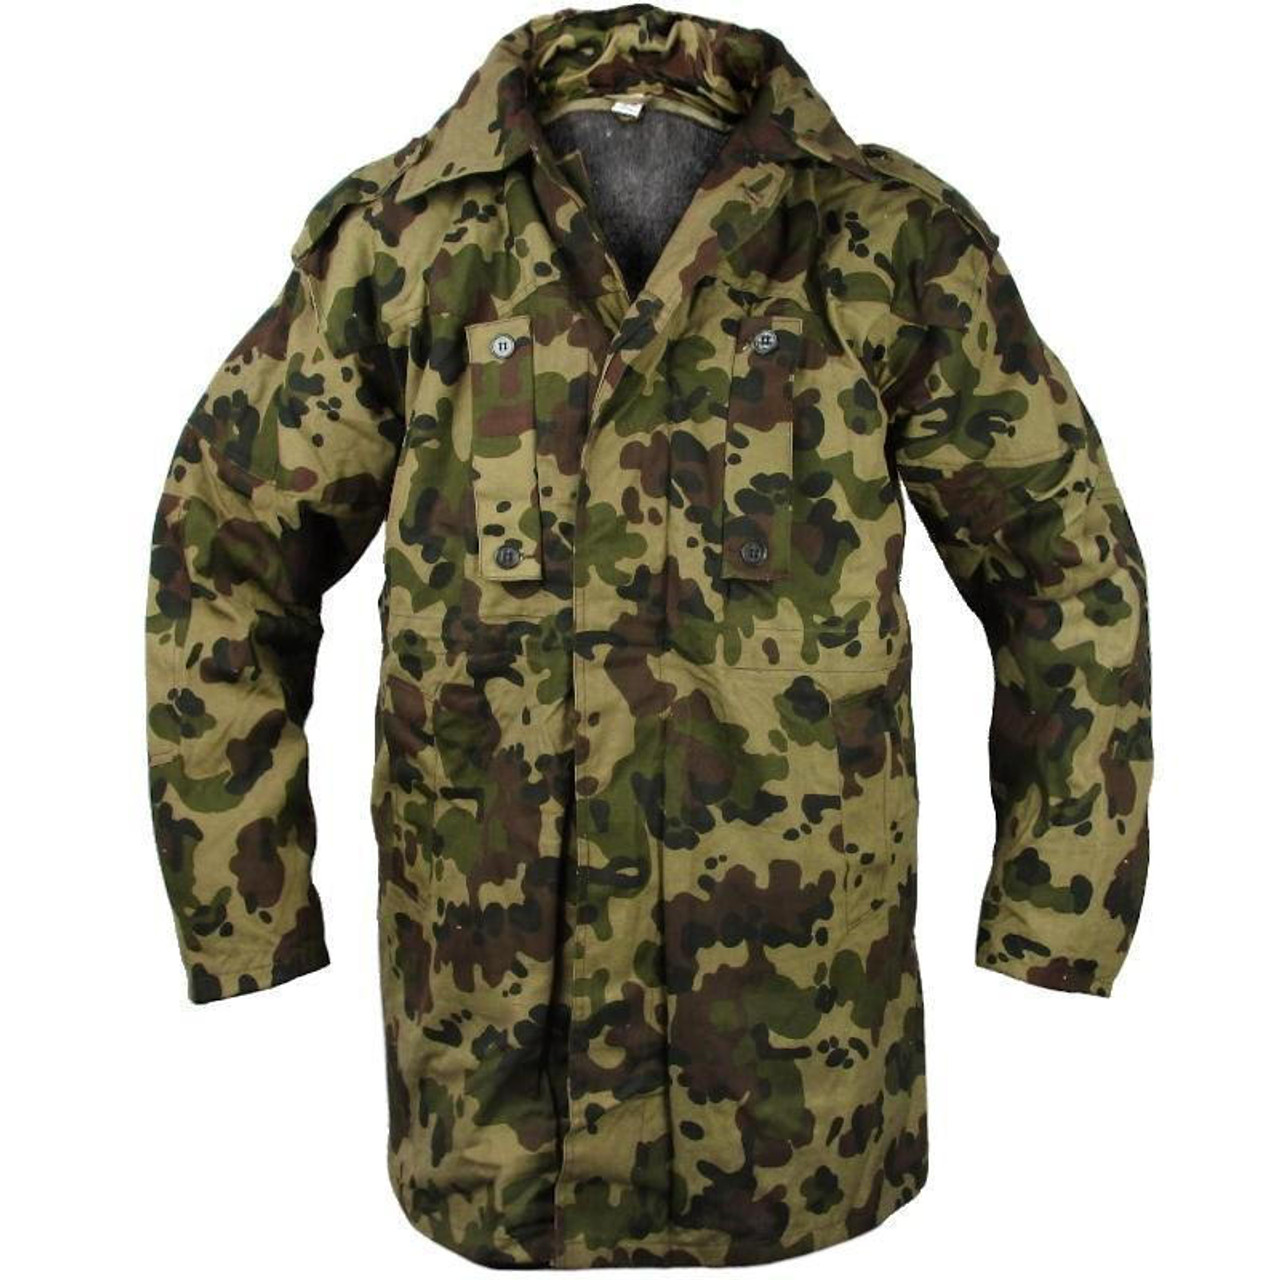 Romanian Spotted Camo Parka with Liner - Army Surplus Warehouse, Inc.